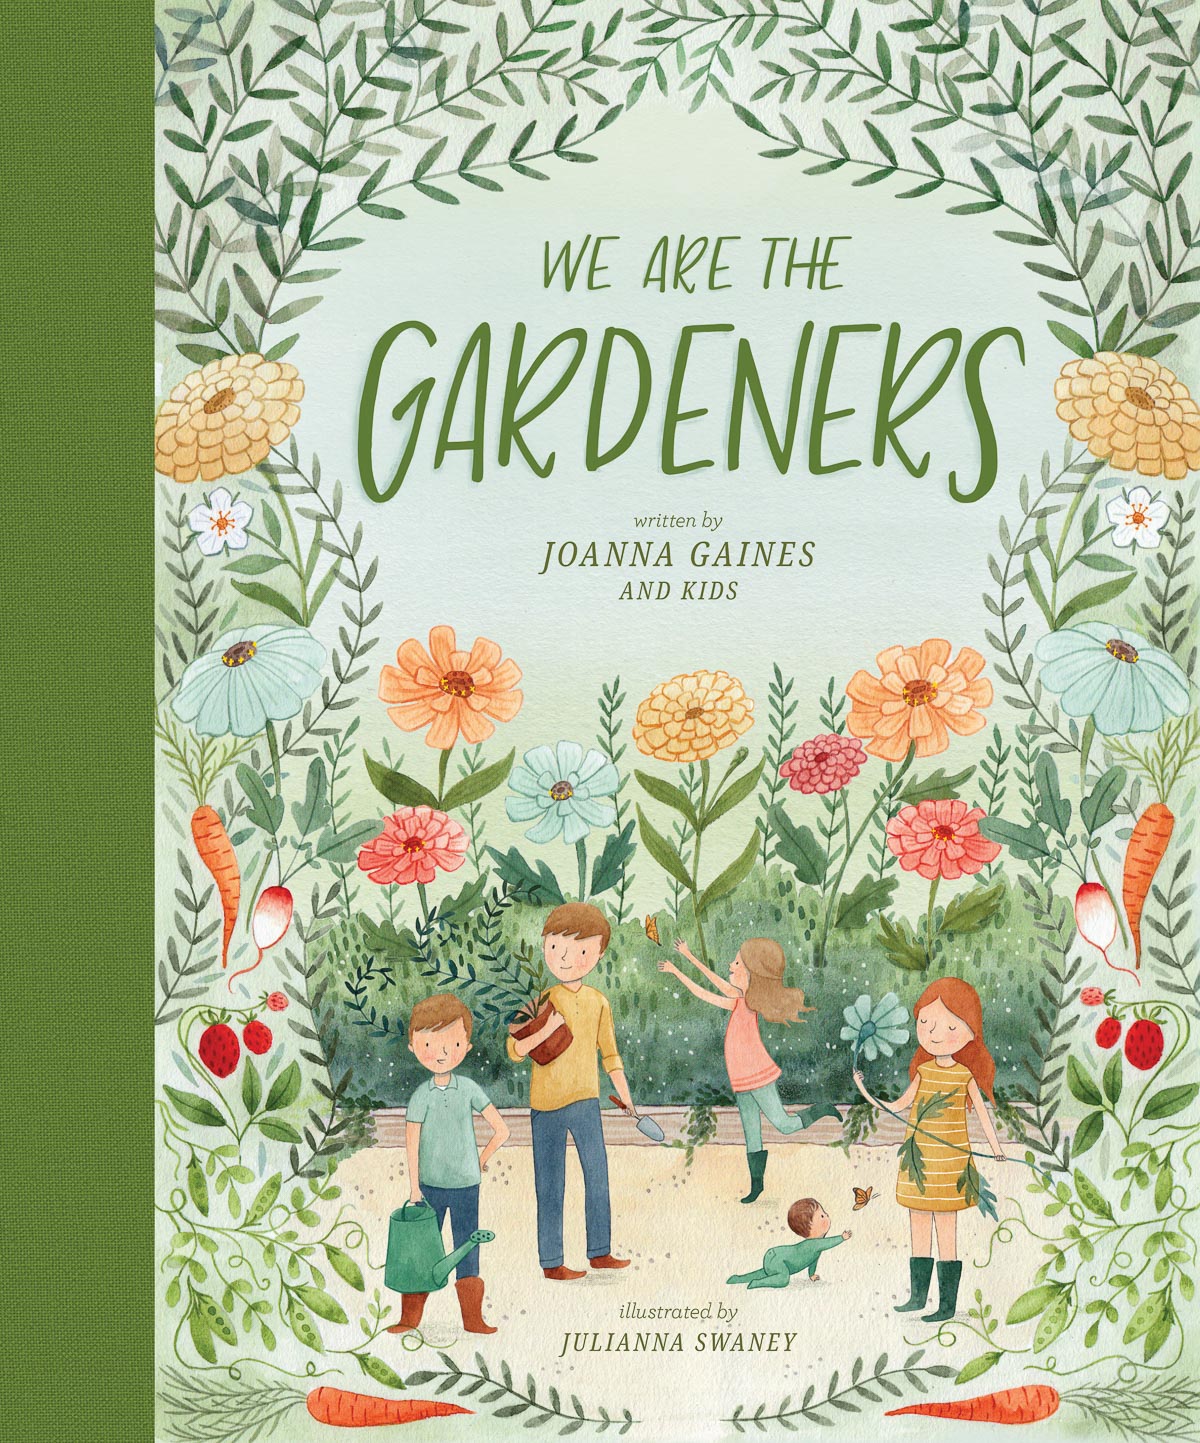 We are the Gardeners by Joanna Gaines is a darling new book about gardening for the whole family.